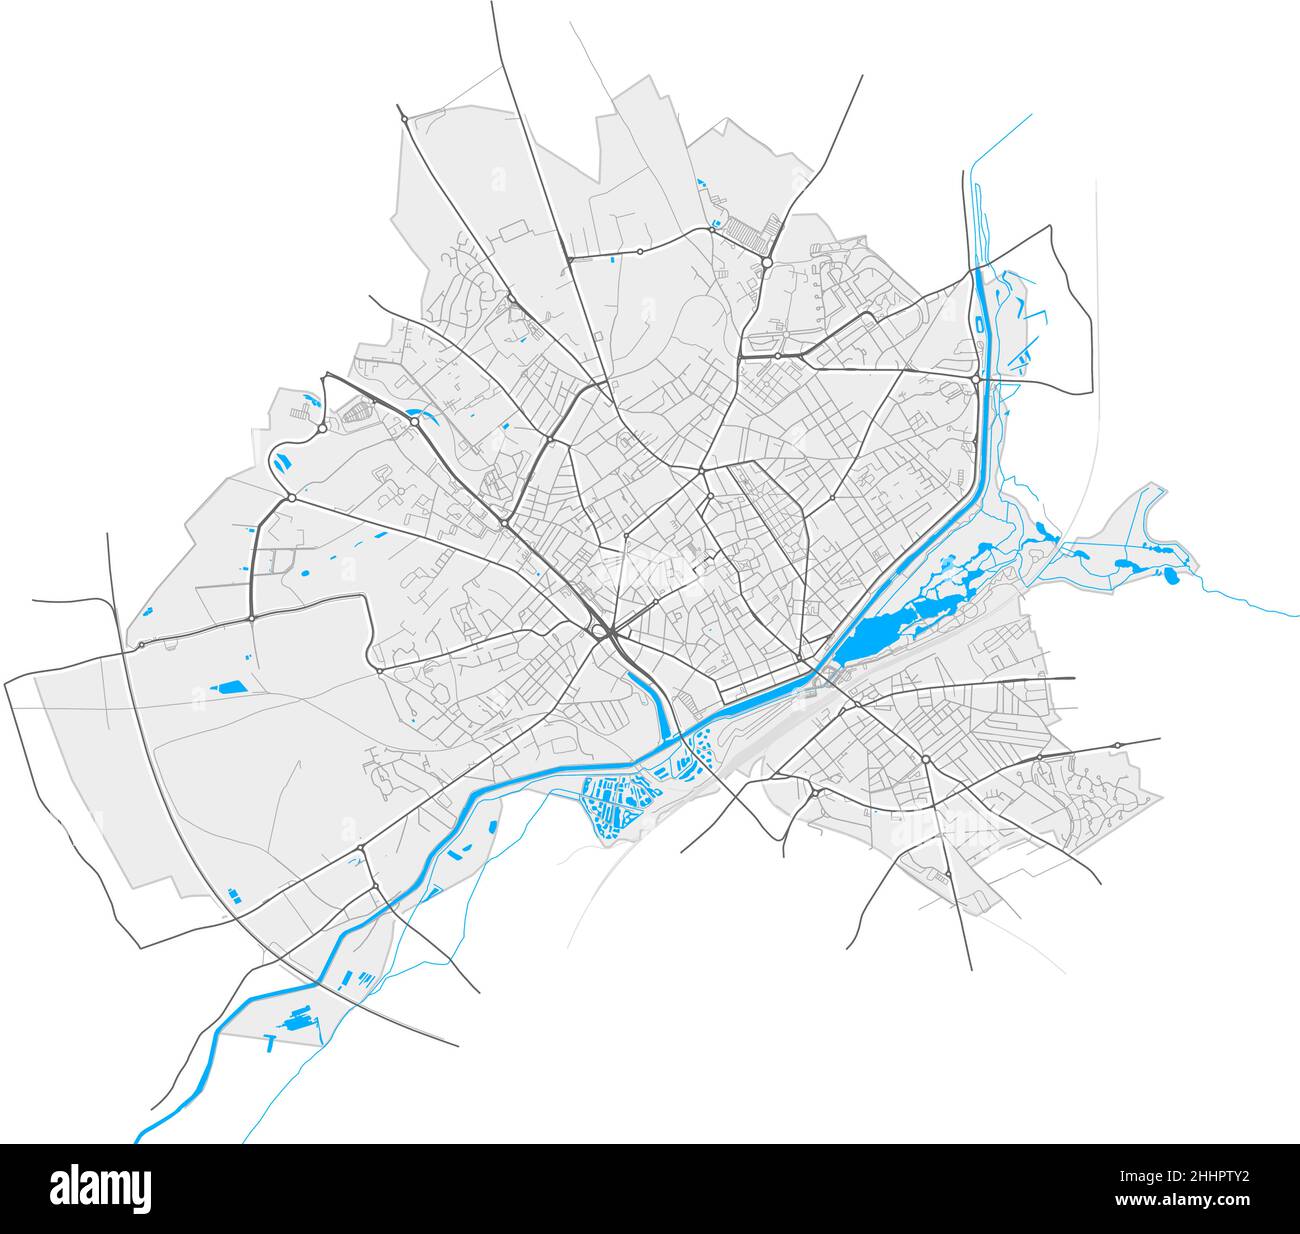 Saint-Quentin, Aisne, France high resolution vector map with city boundaries and editable paths. White outlines for main roads. Many detailed paths. B Stock Vector